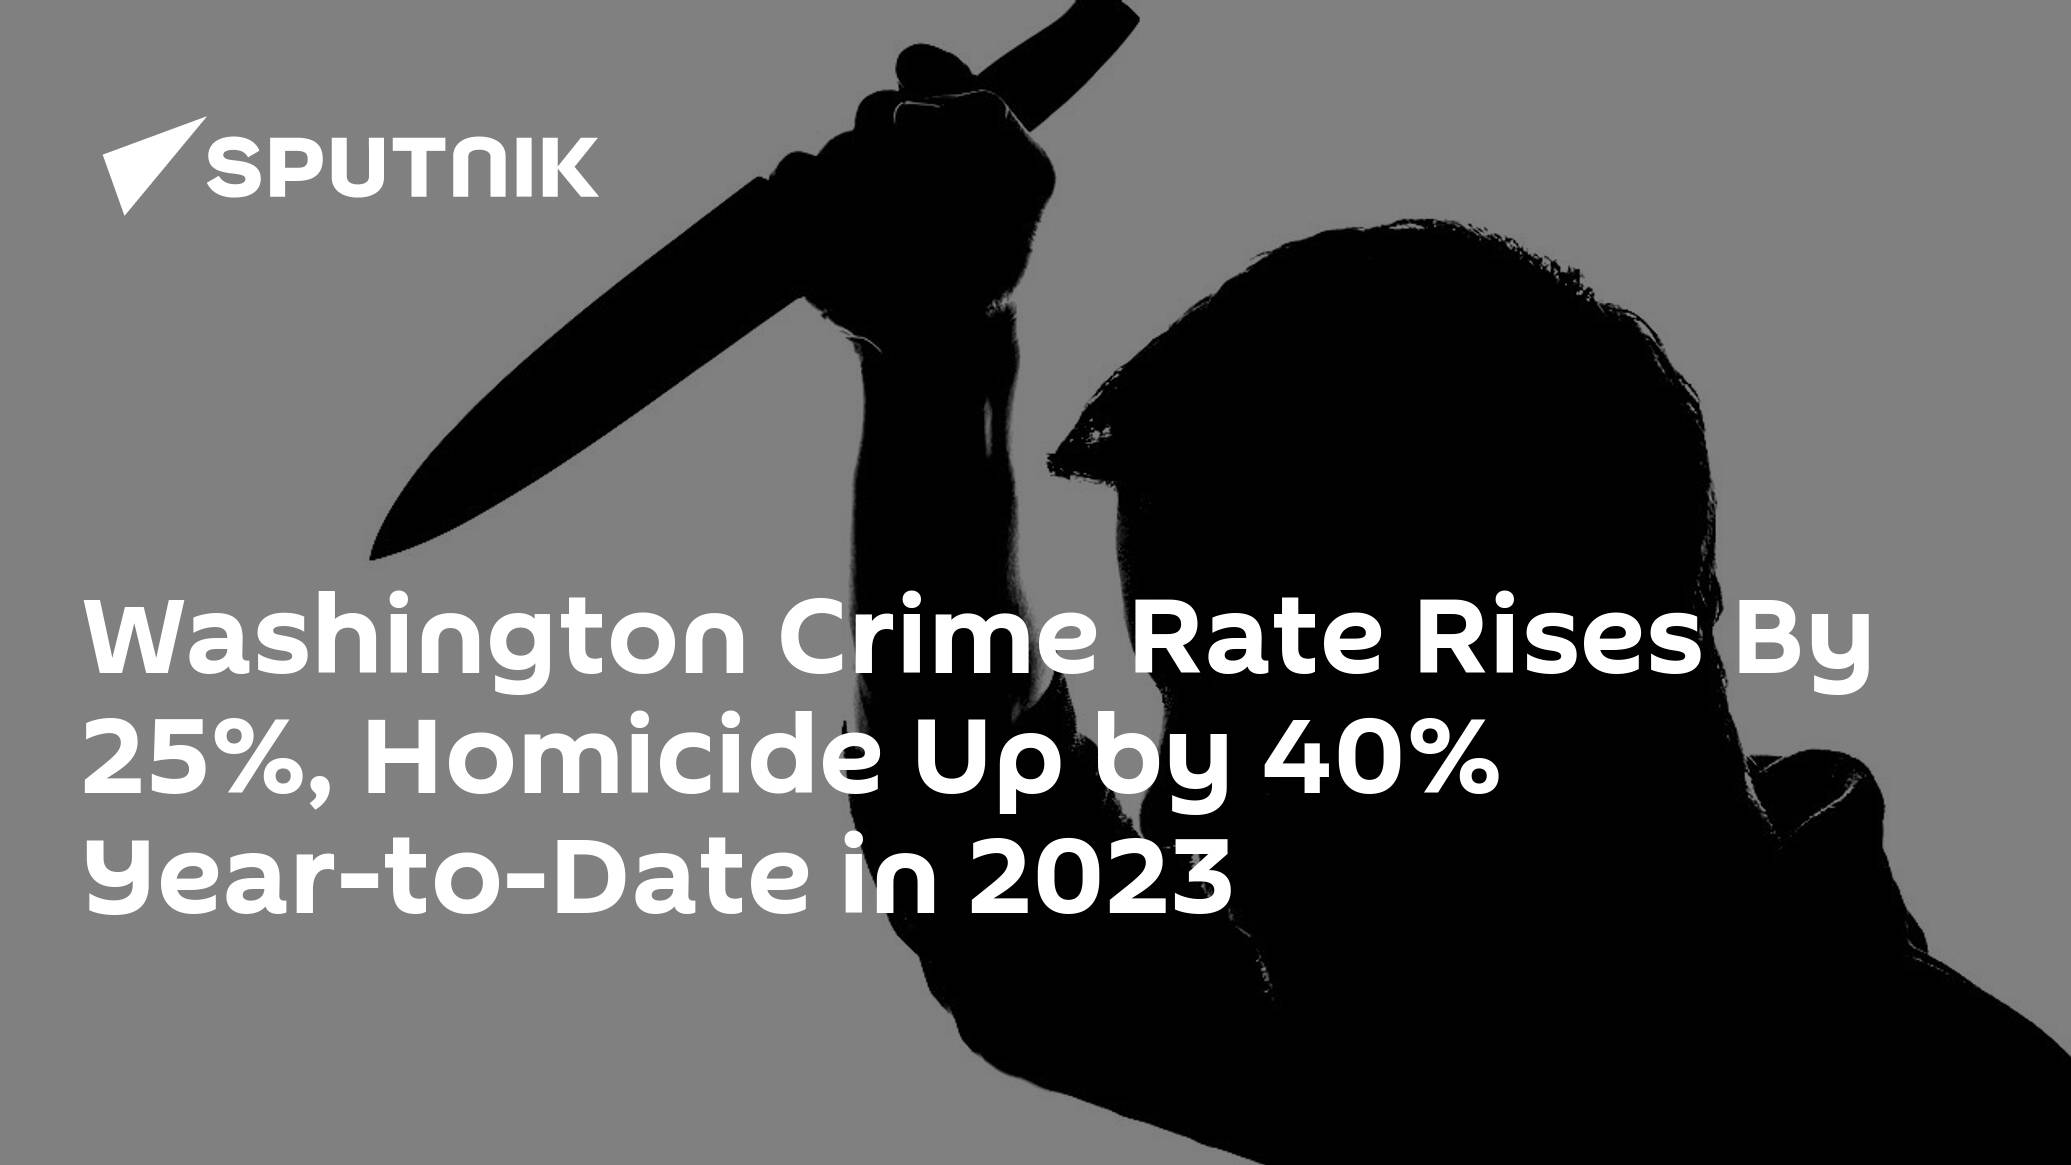 Washington Crime Rate Rises By 25, Homicide Up by 40 YeartoDate in 2023